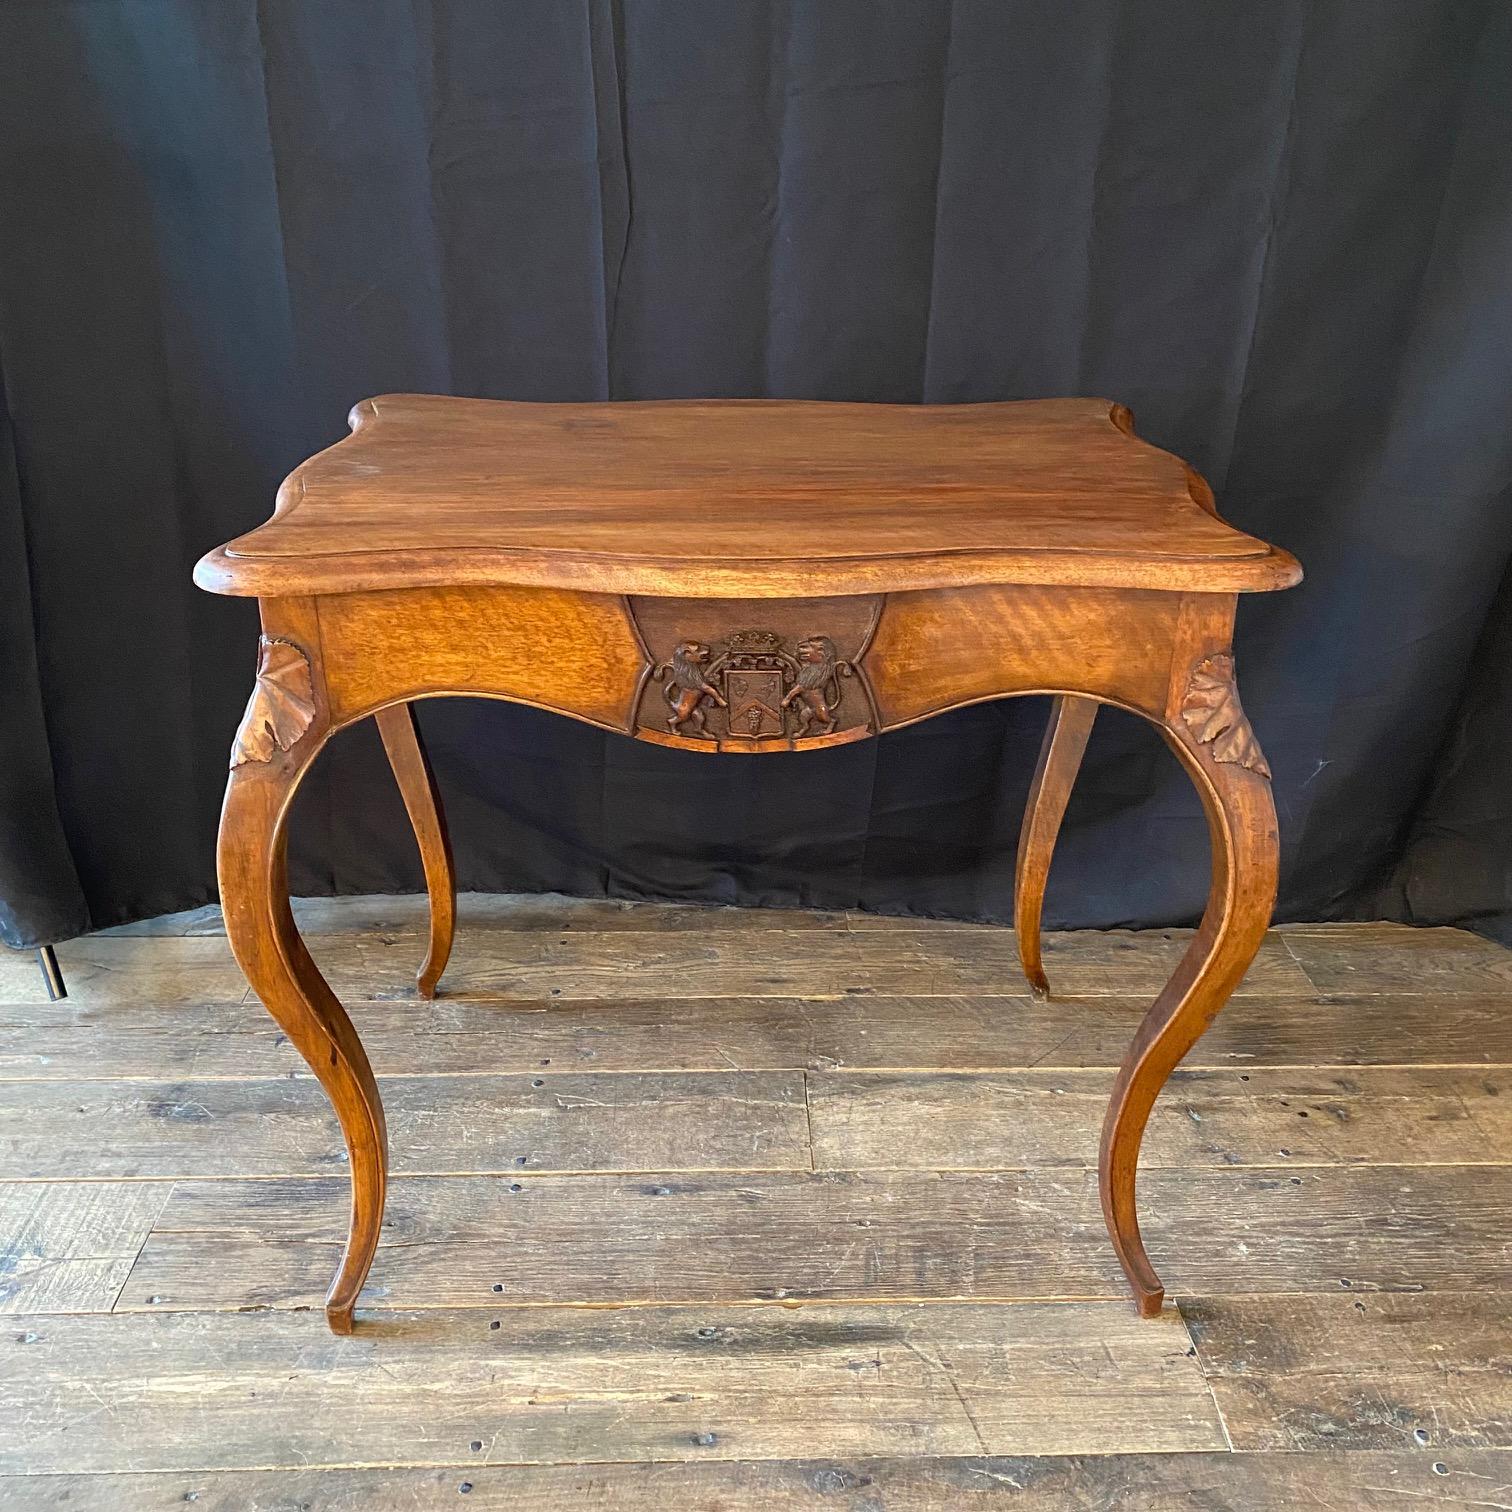 Antique French accent table or side table that would make a stunning writing table or desk as well, sure to add elegance and museum quality interest in any room in the home! Direct from France,  the original large crest in shield sets the tone and